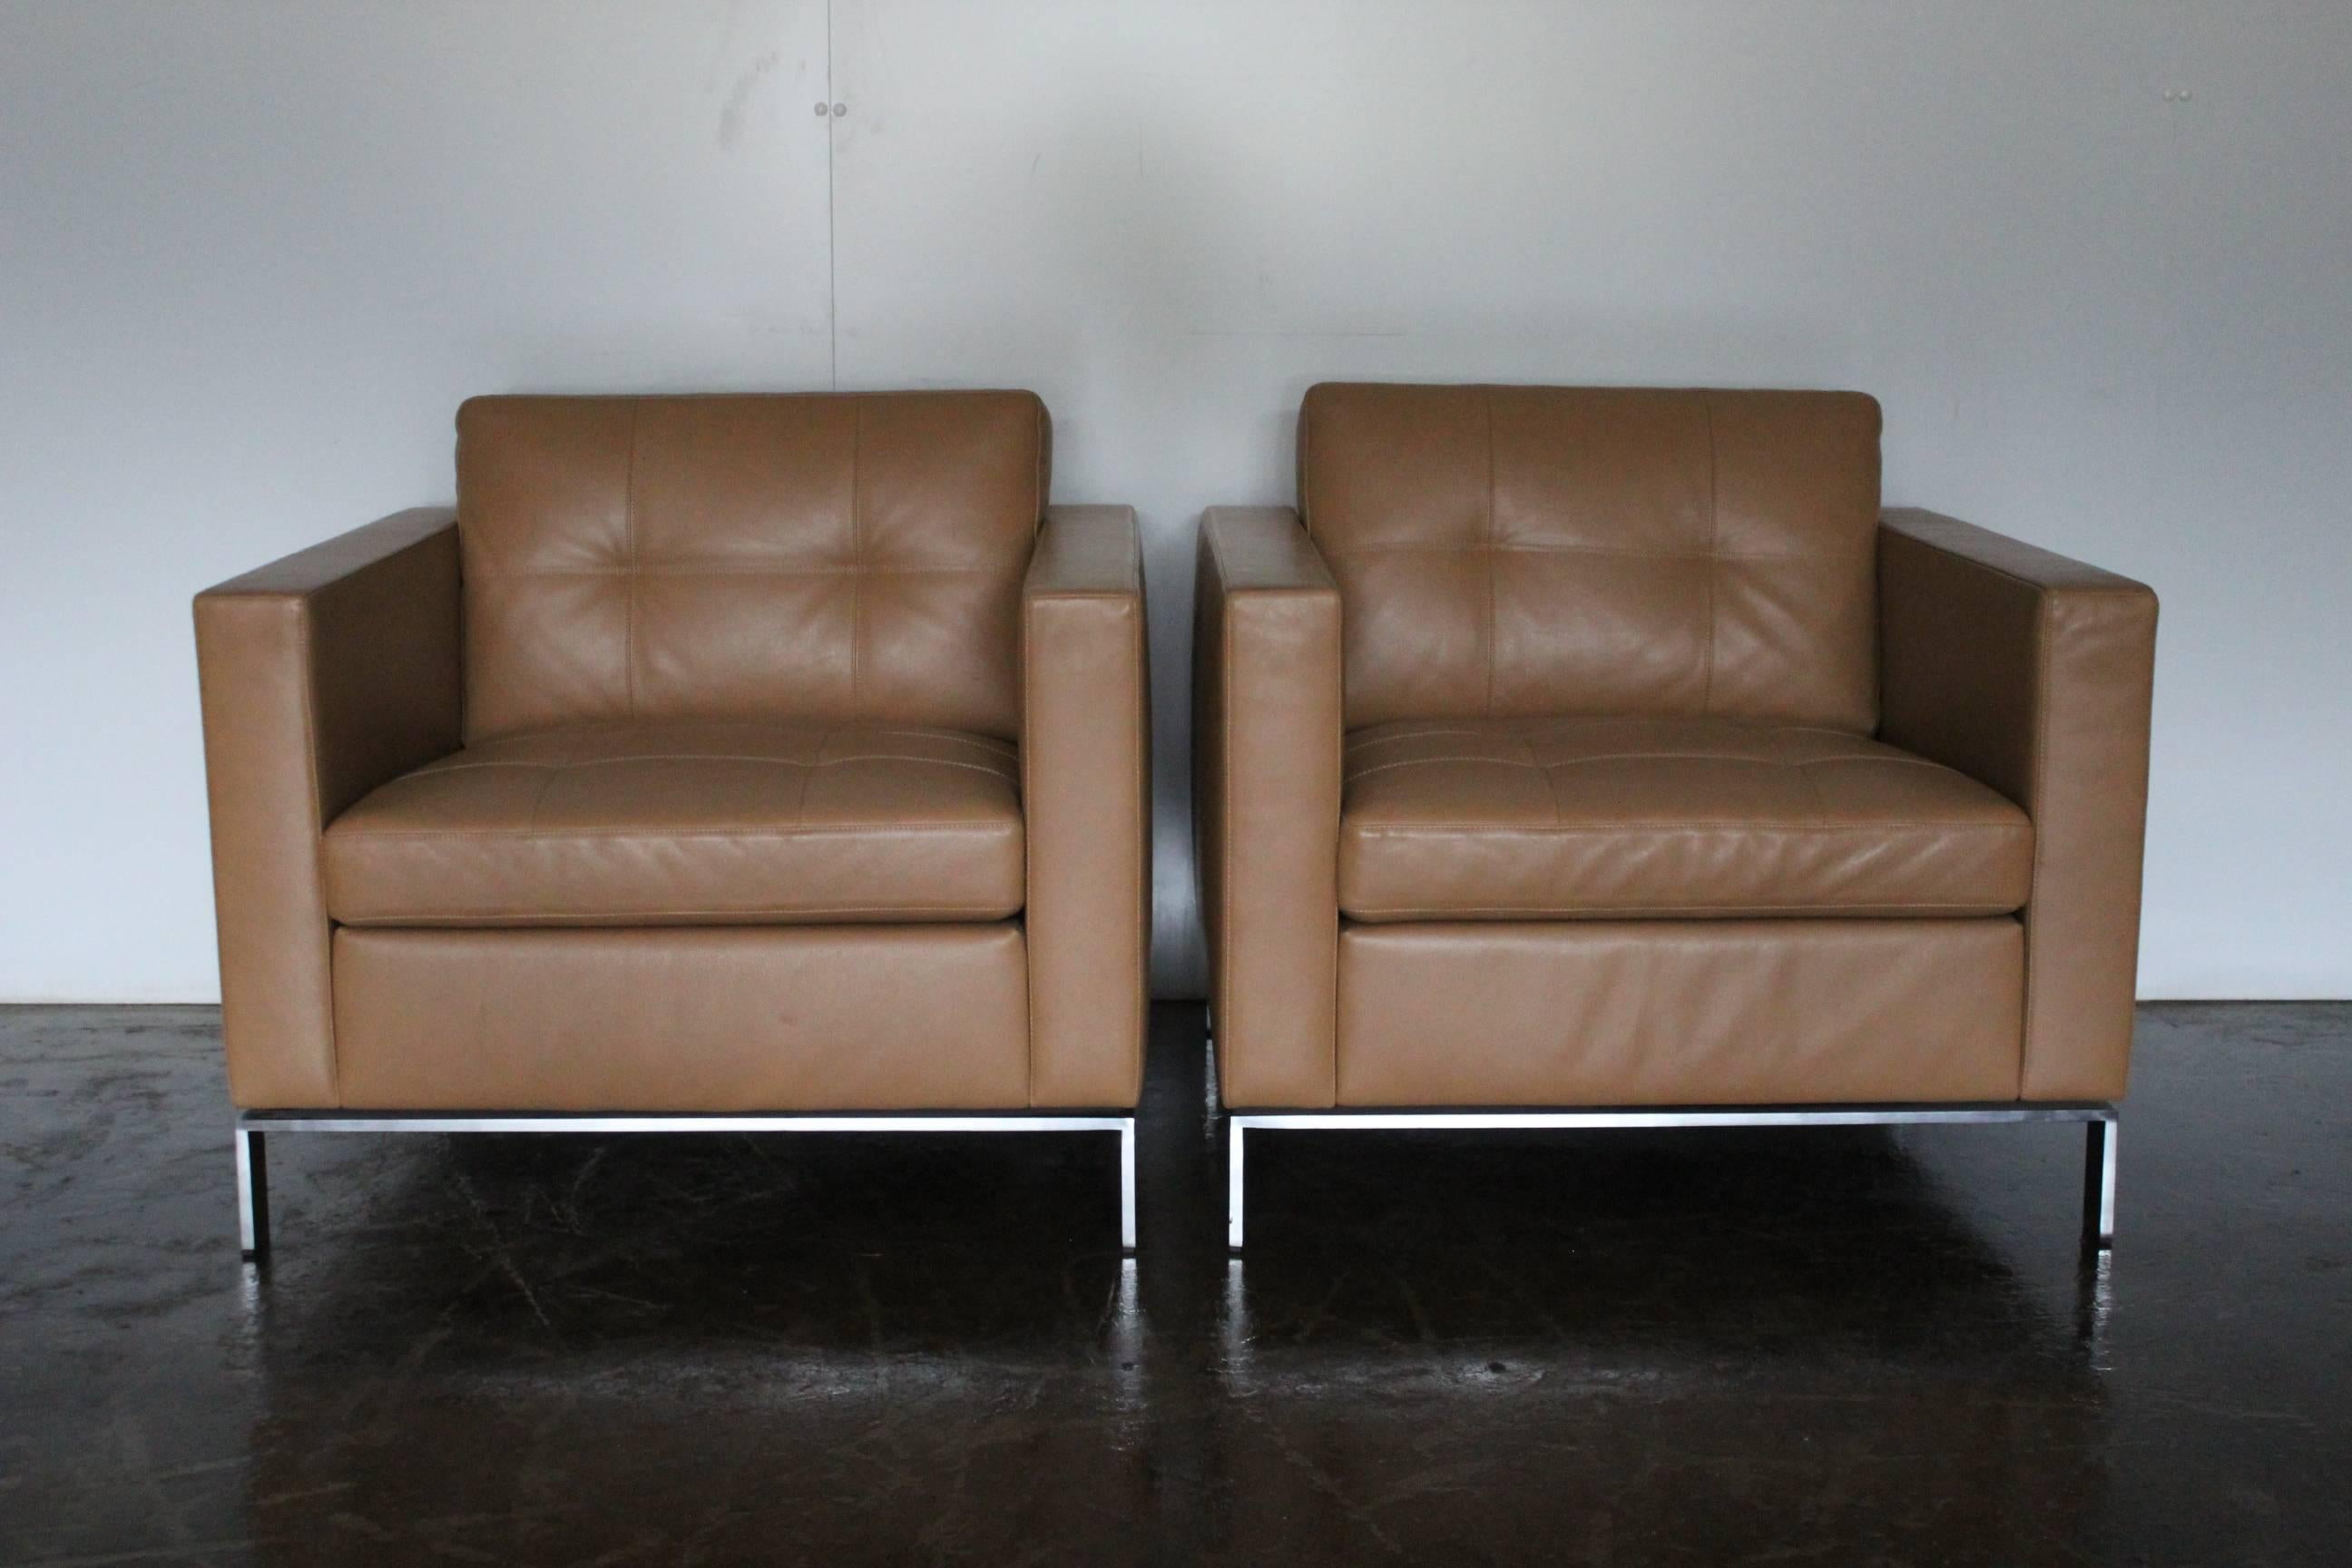 Metalwork Walter Knoll “Foster 502” Two-Sofa and Two-Armchair Suite in Pale Brown Leather